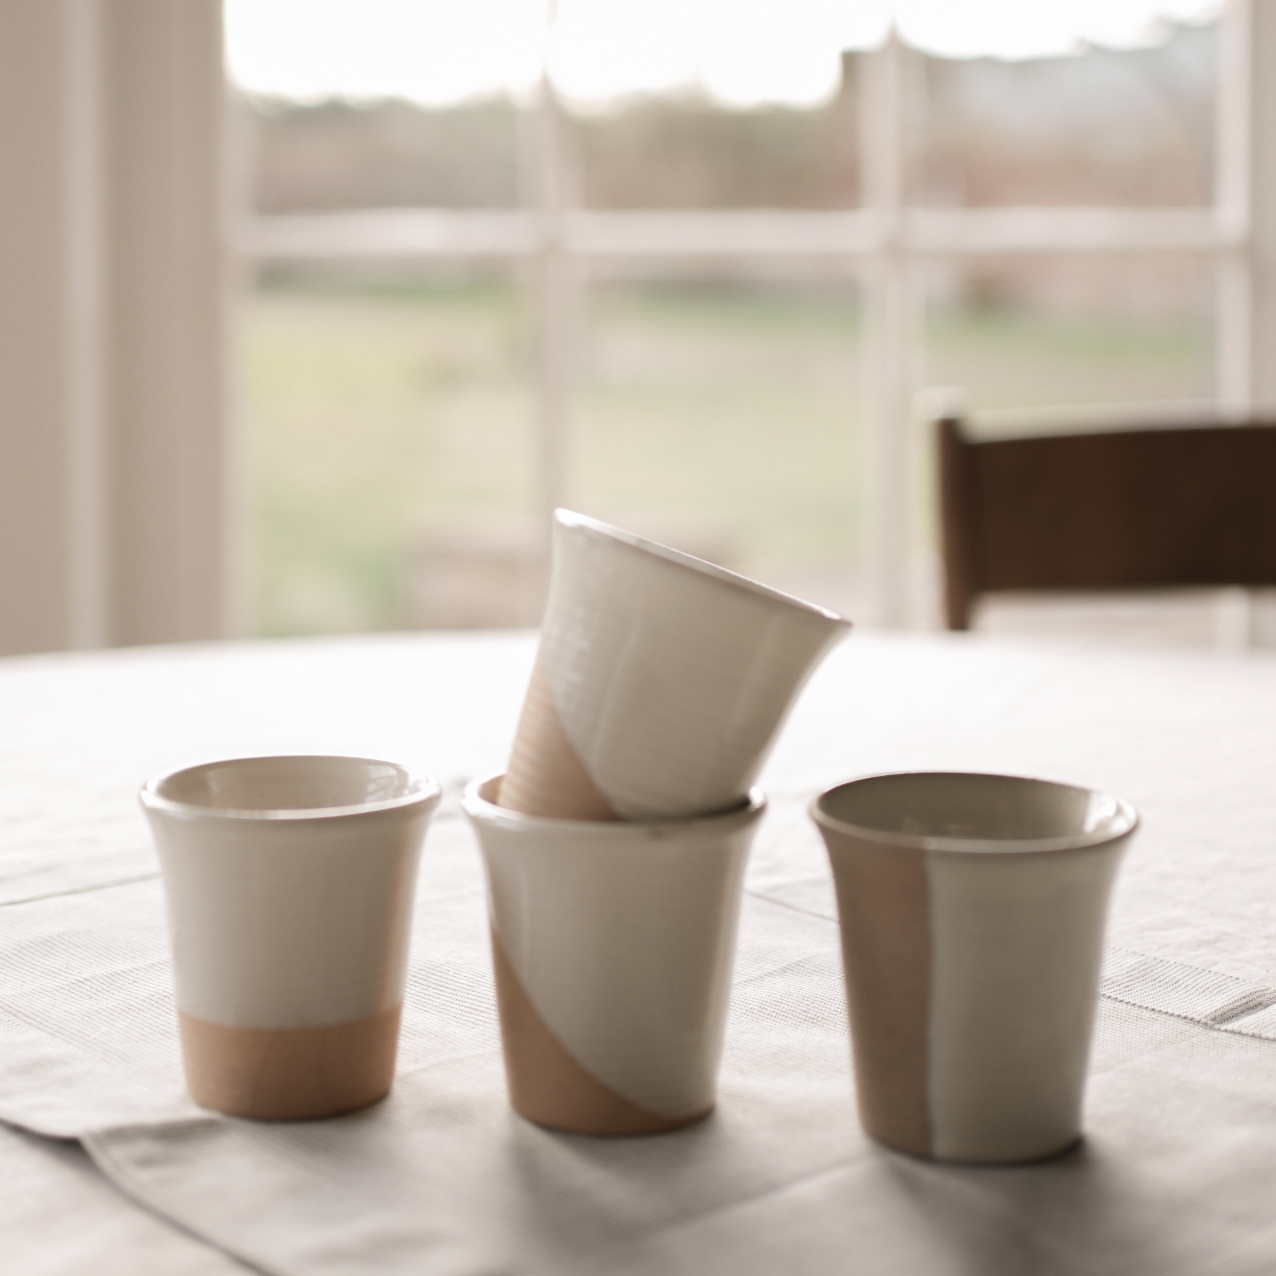 Stoneware Coffee Cups on a linen covered table in front of a window.